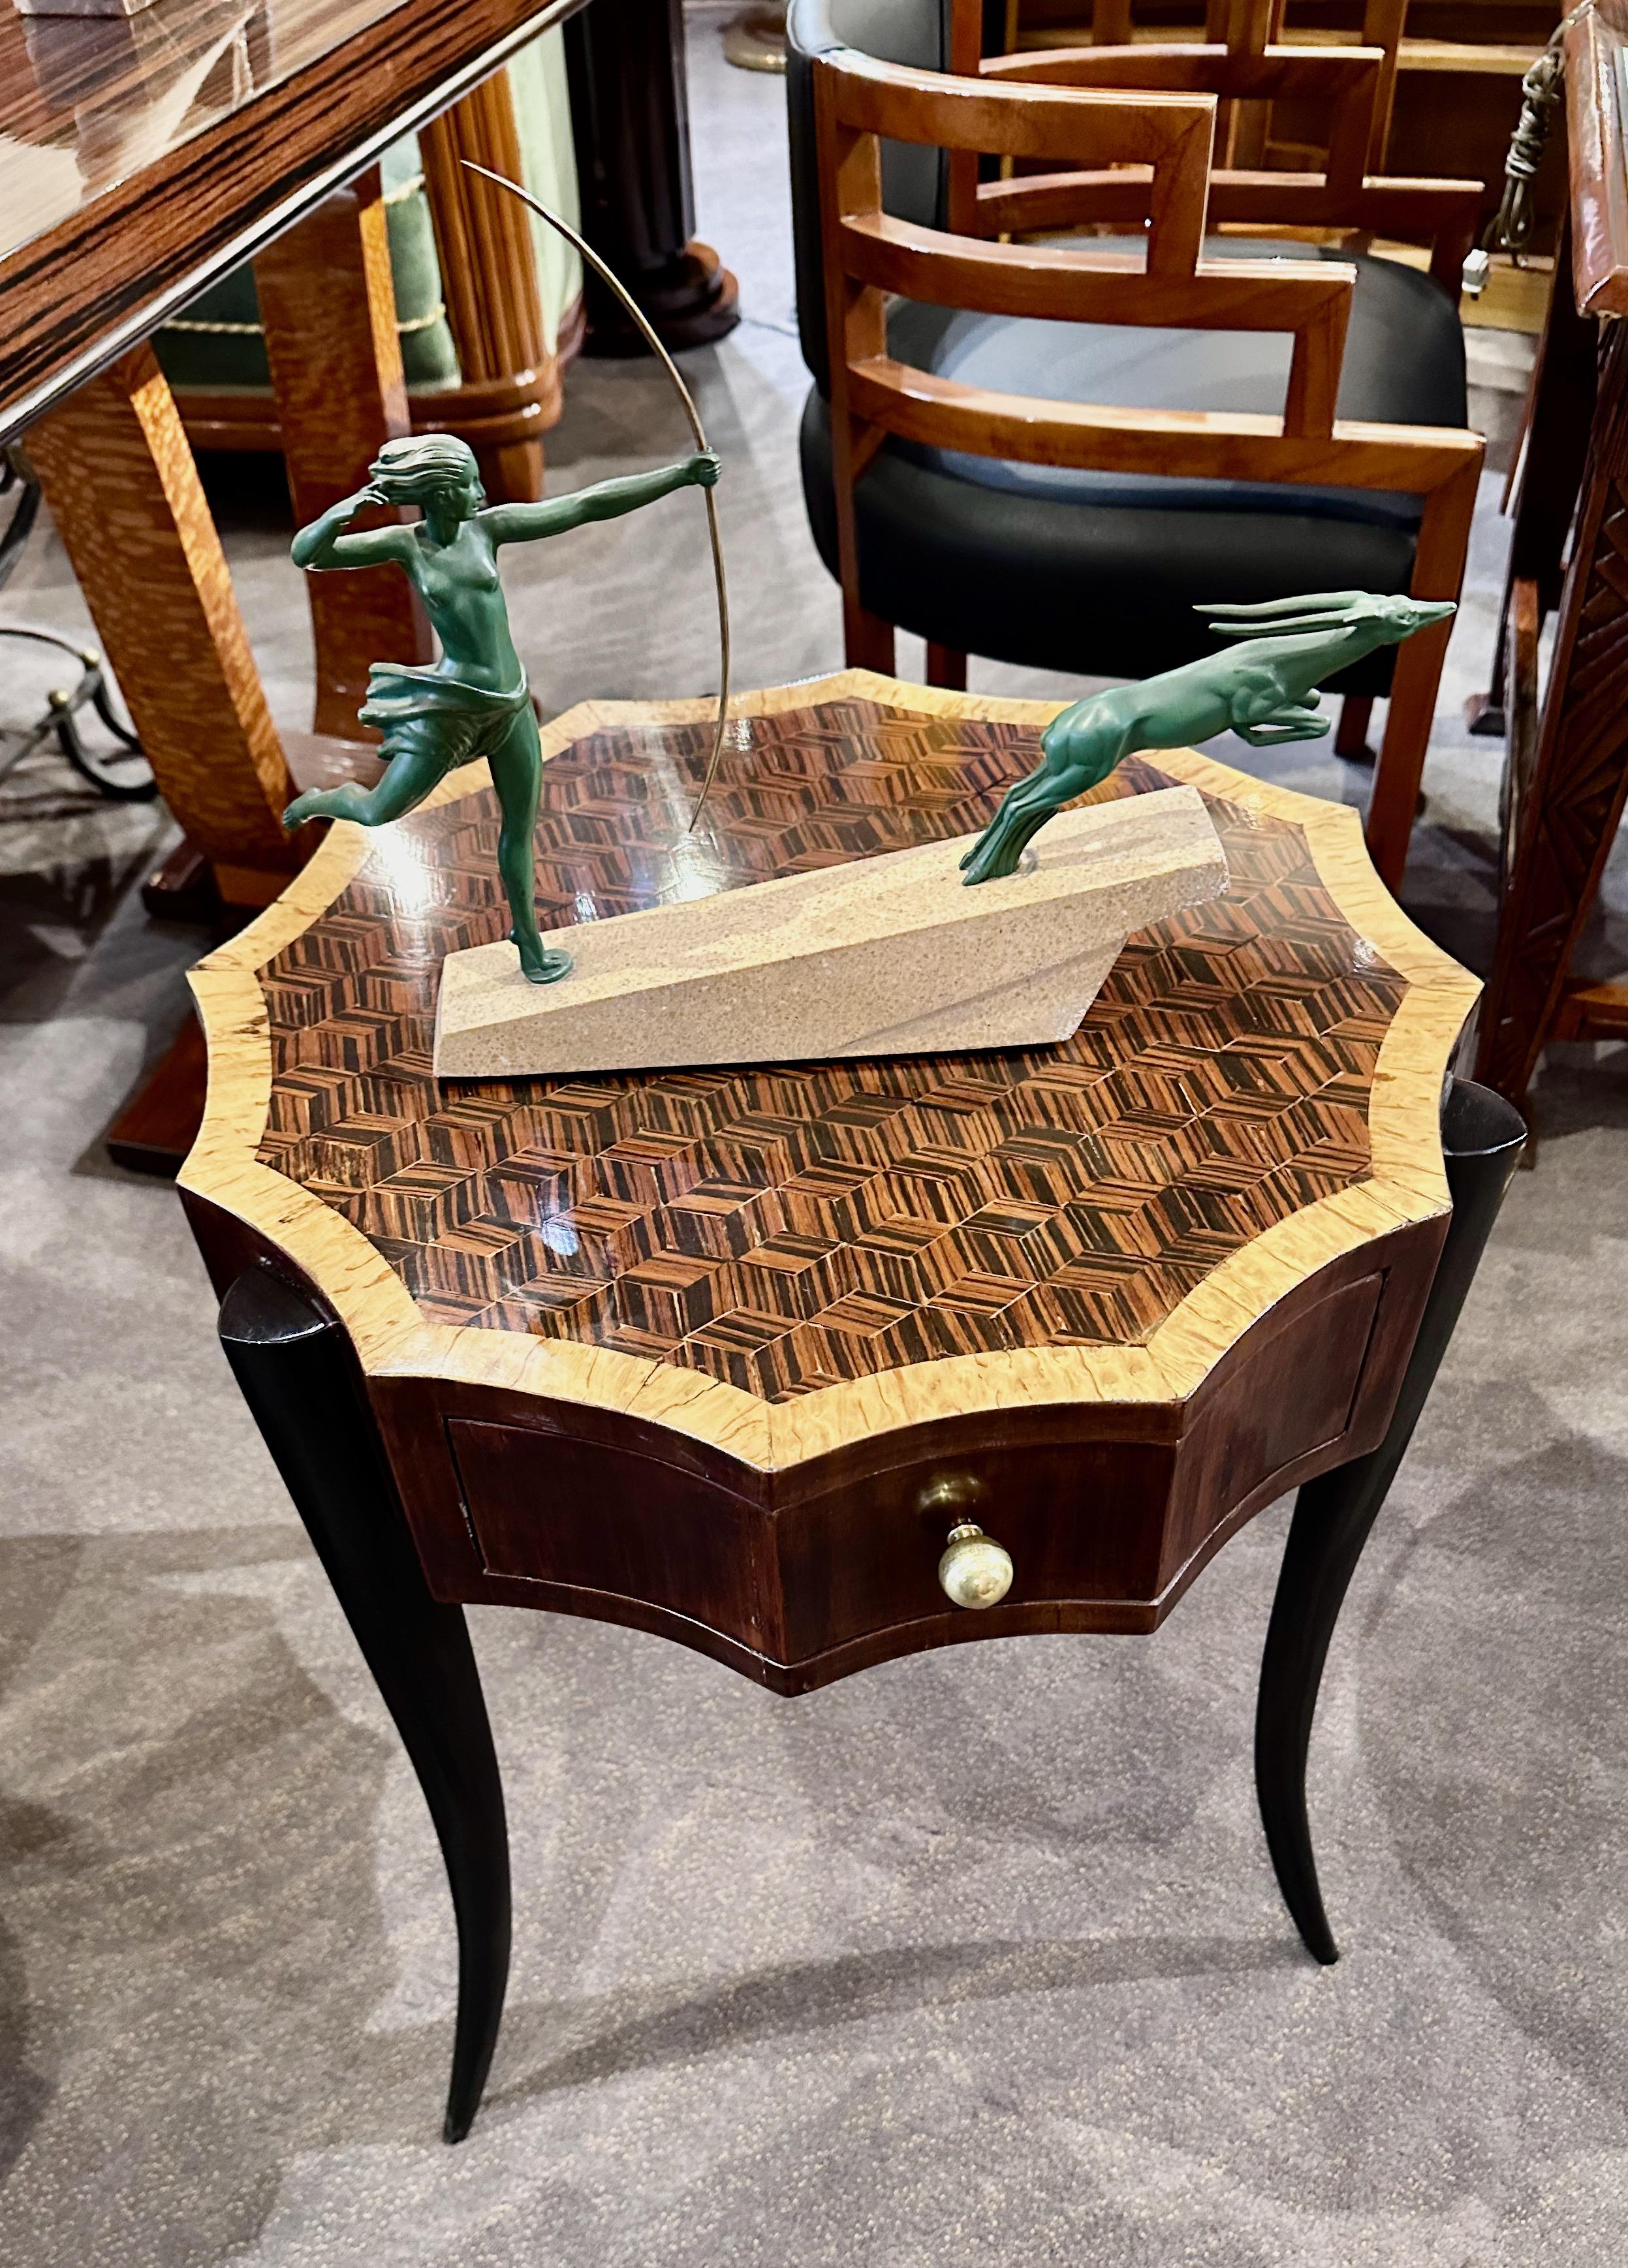 An Art Deco era exquisite 12-sided Faceted Side Table. This unique piece seamlessly blends intricate marquetry craftsmanship with geometric design elements, creating a stunning focal point for any room. We have a matching pair of these tables, but